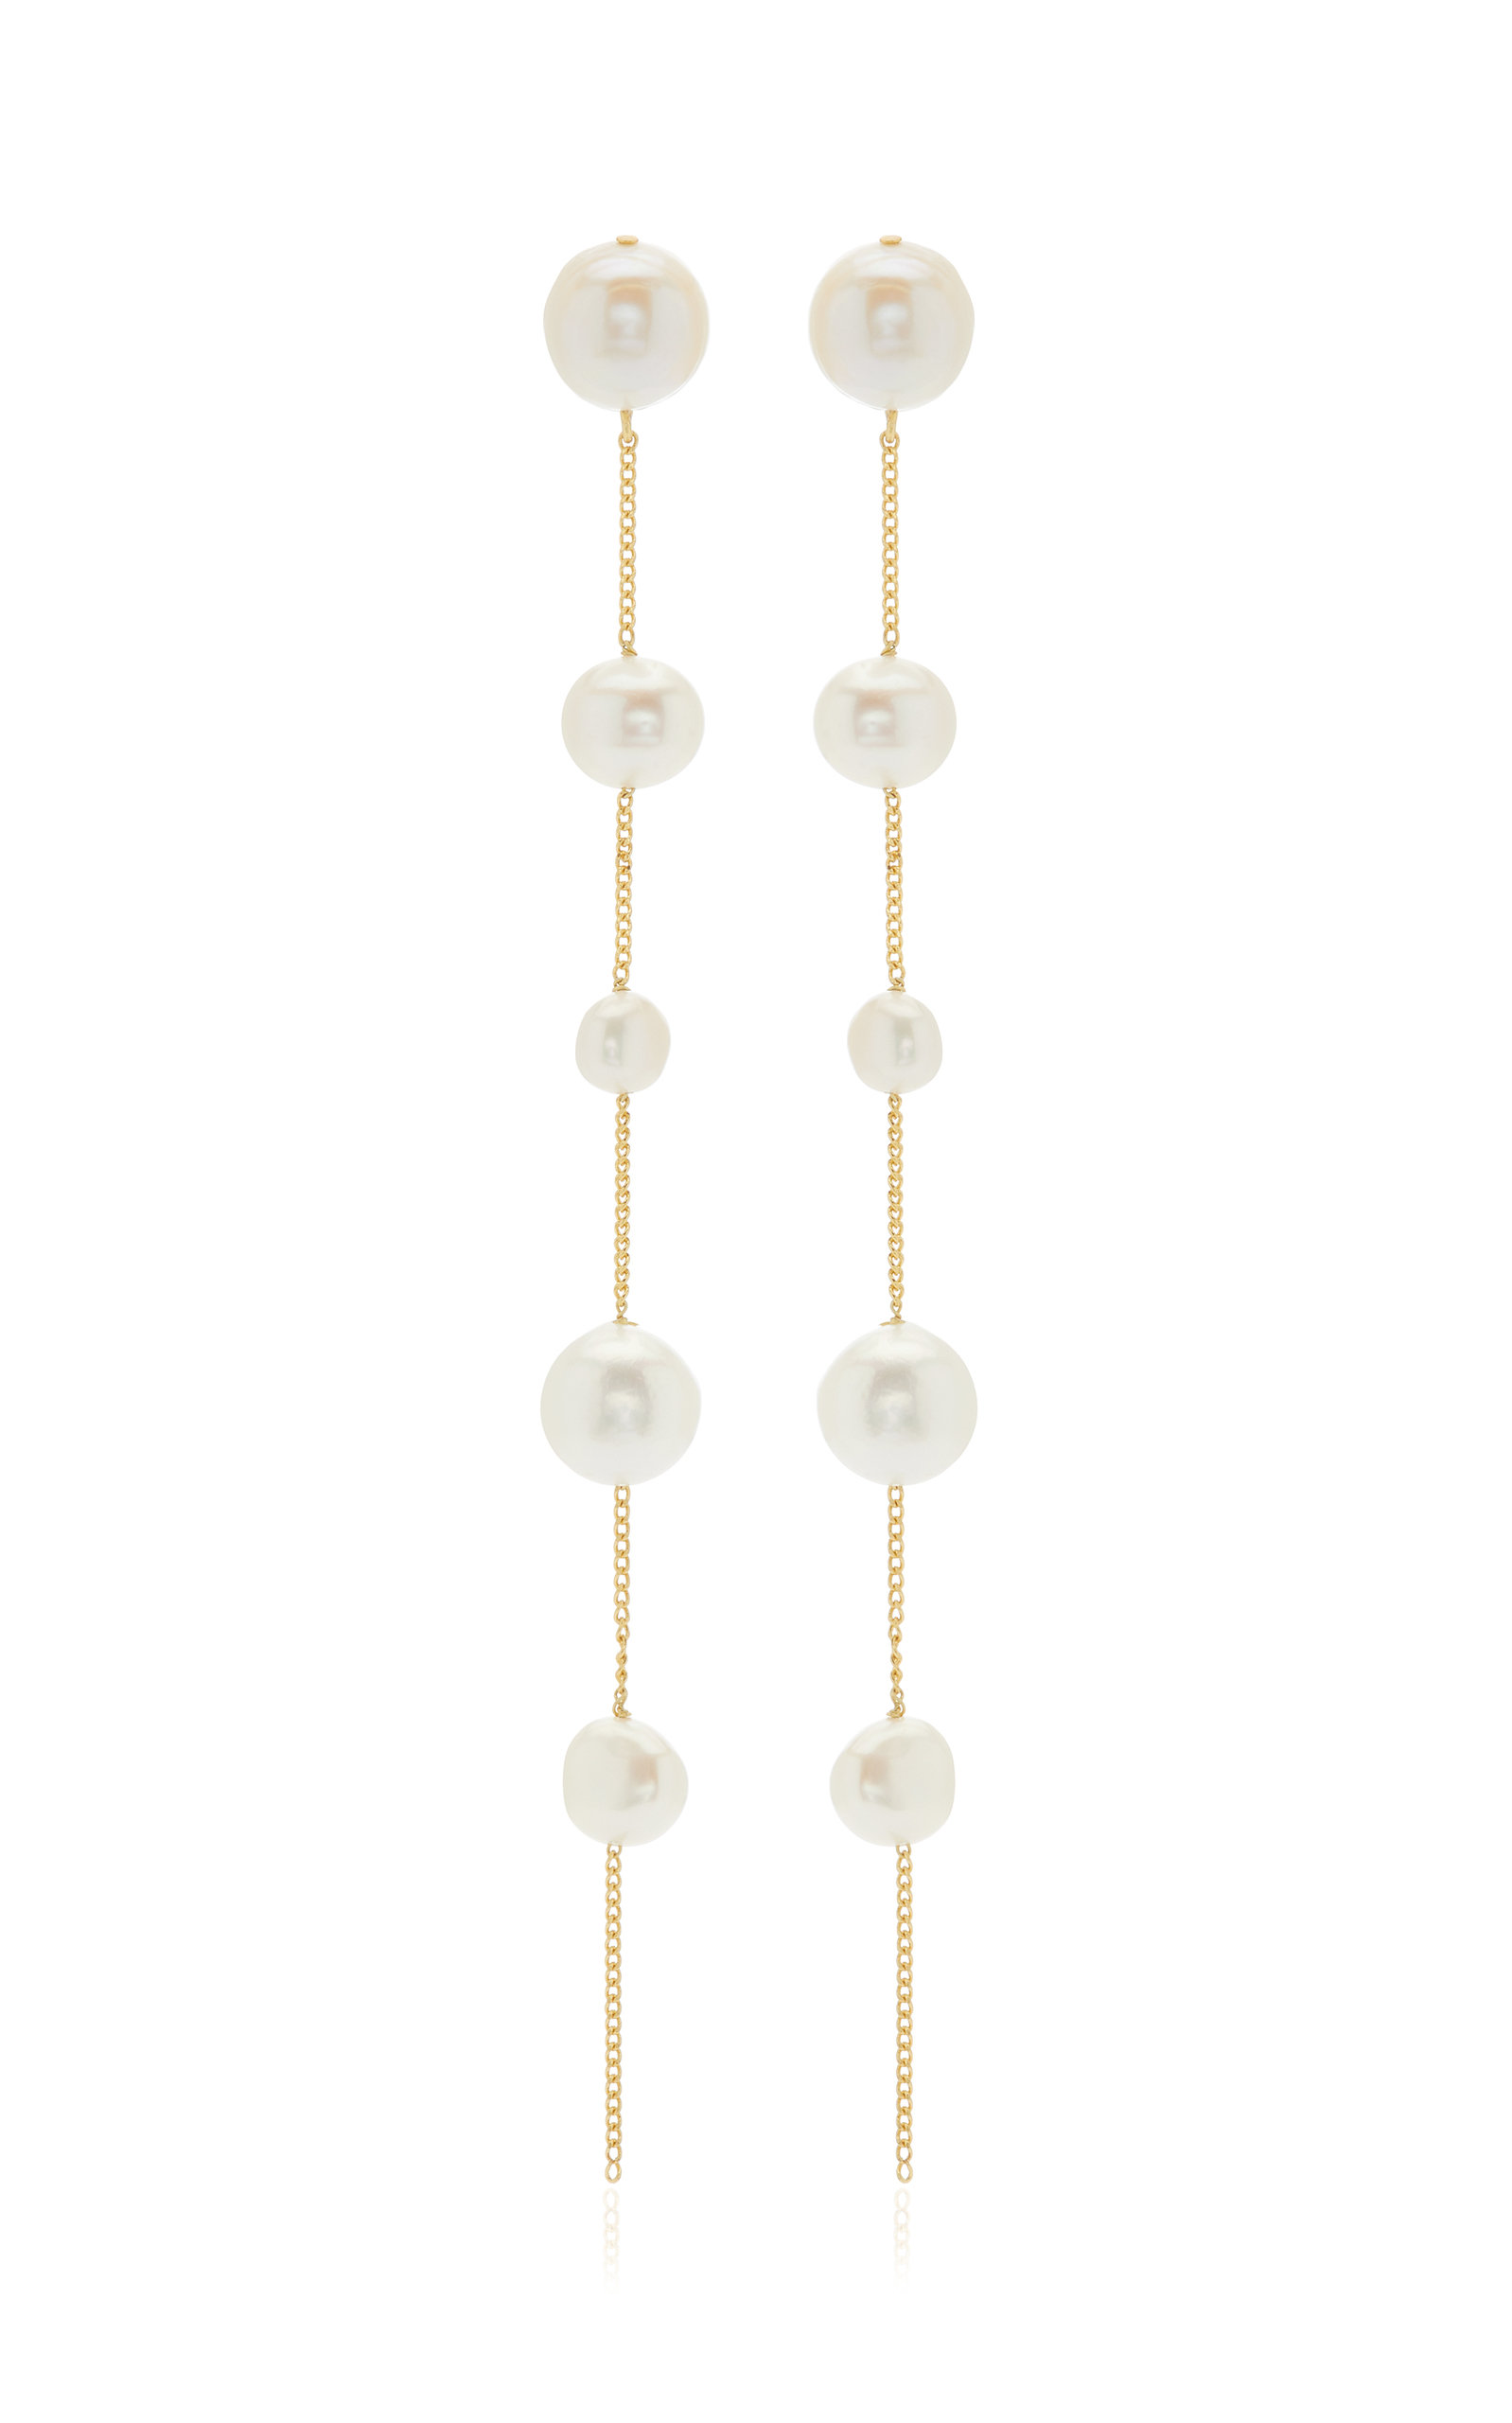 Cult Gaia - Women's Atum Brass and Pearl Earrings - White - OS - Moda Operandi - Gifts For Her